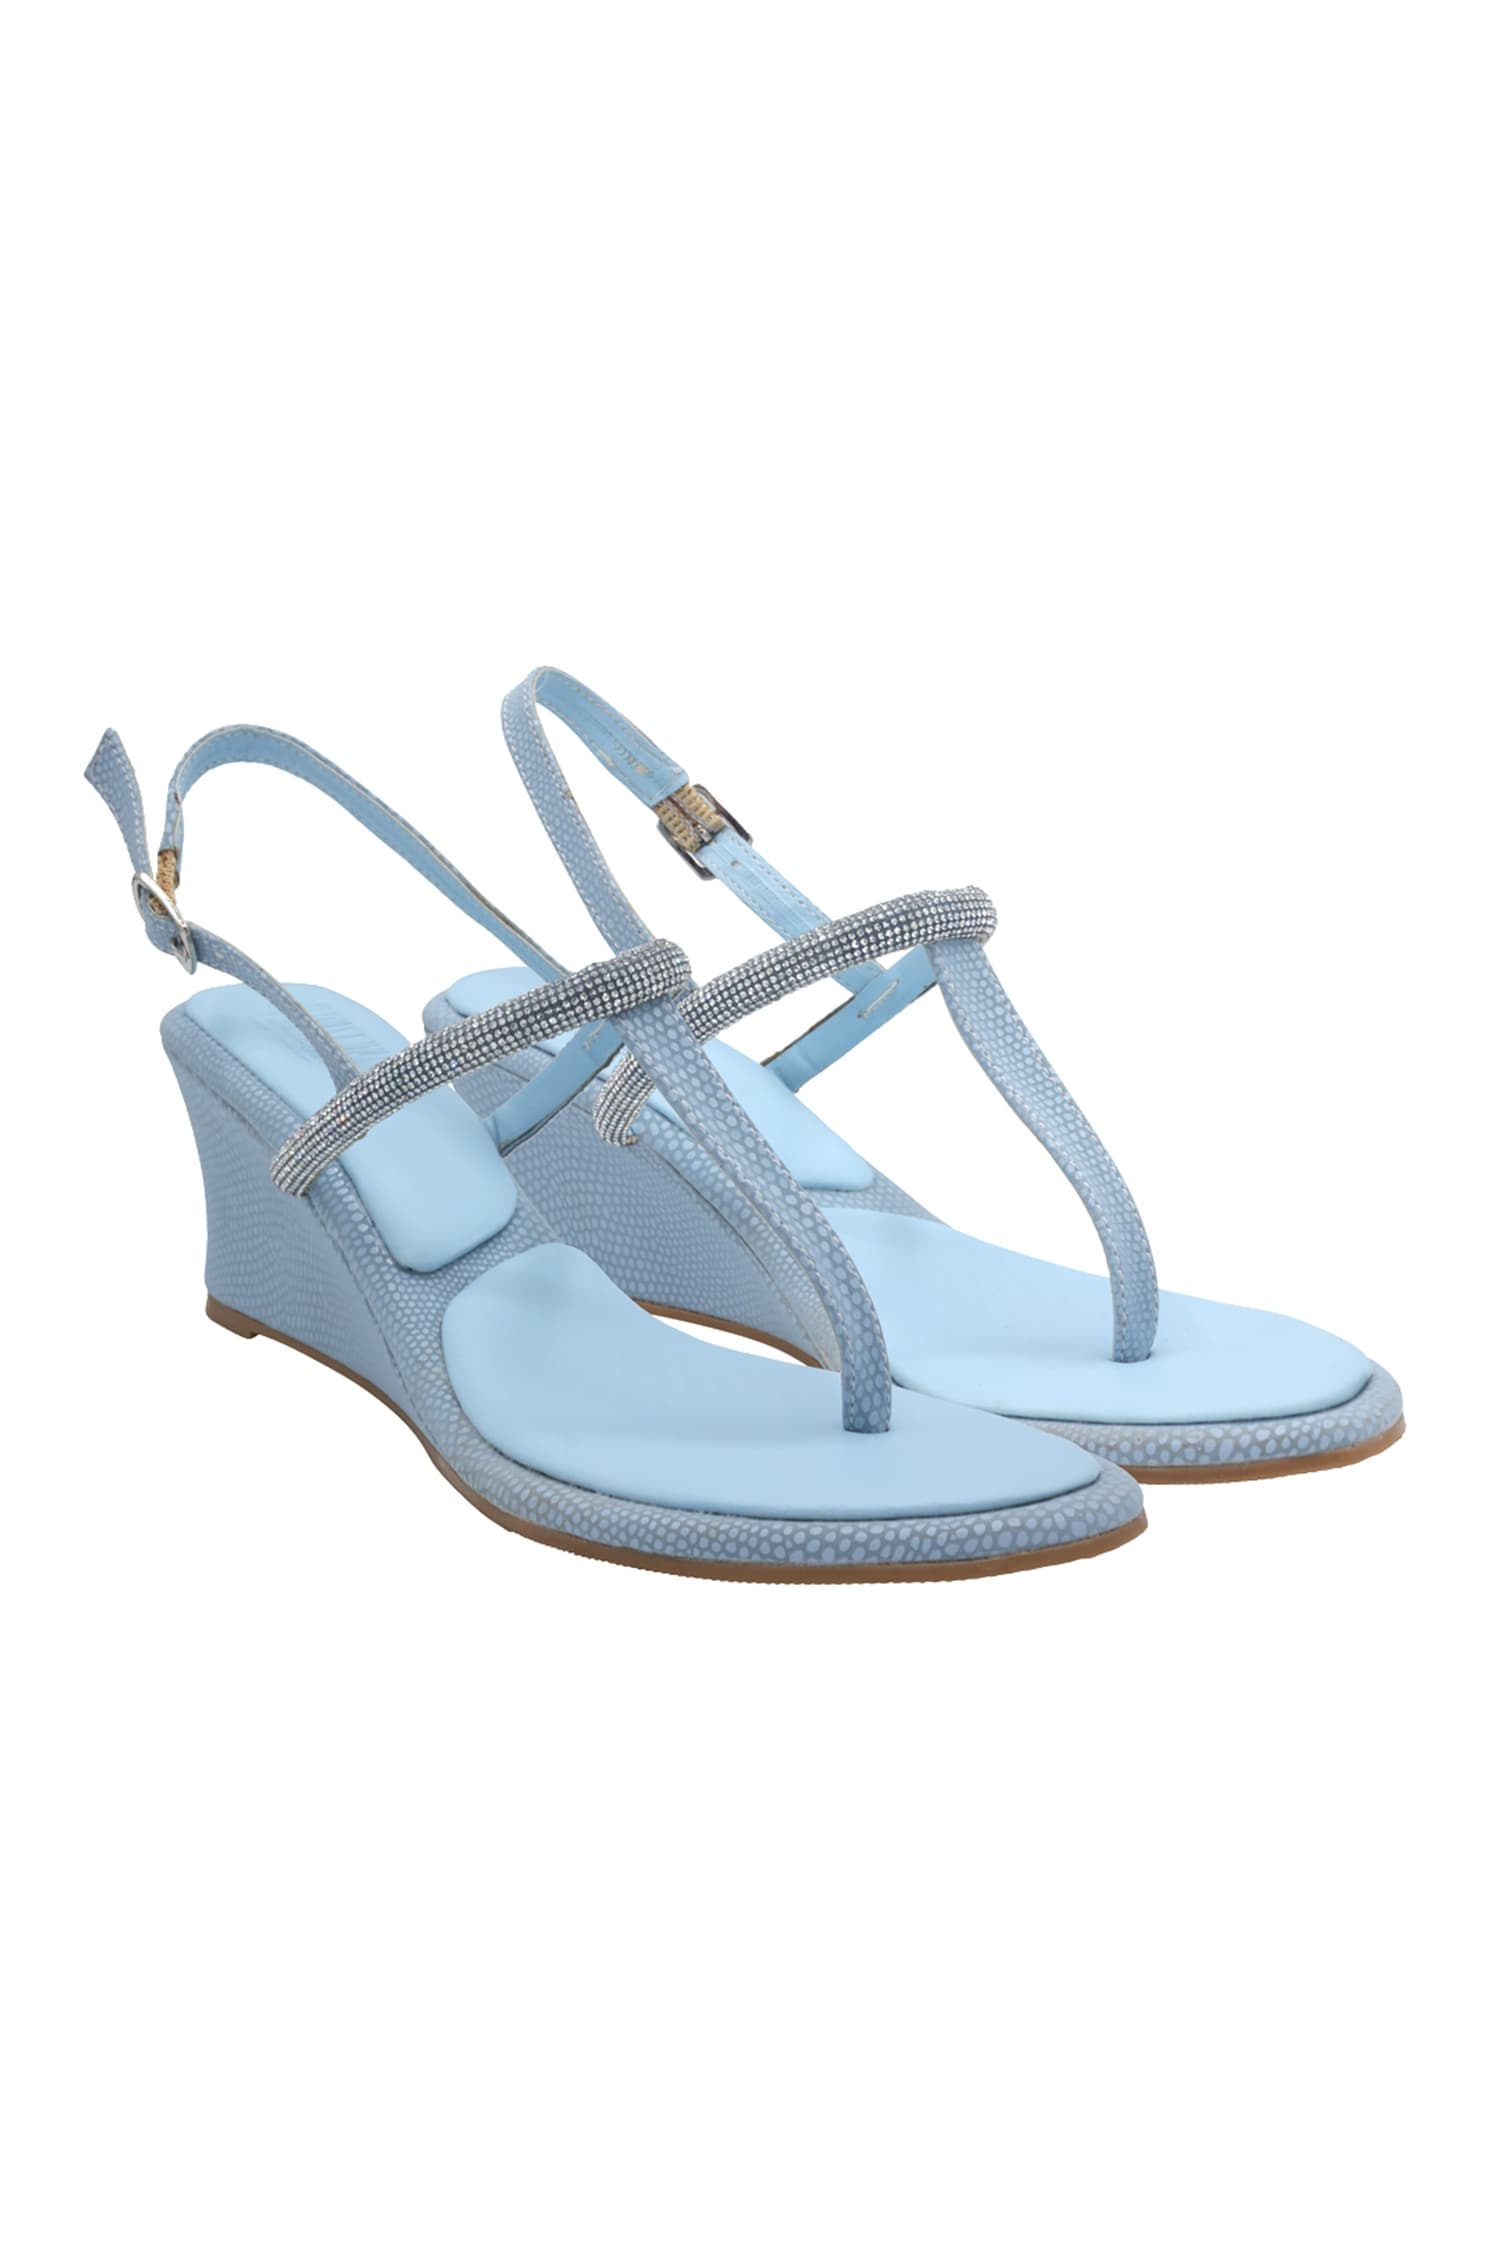 Veruschka by Payal Kothari Blue Faux Leather Strappy Wedge Sandals